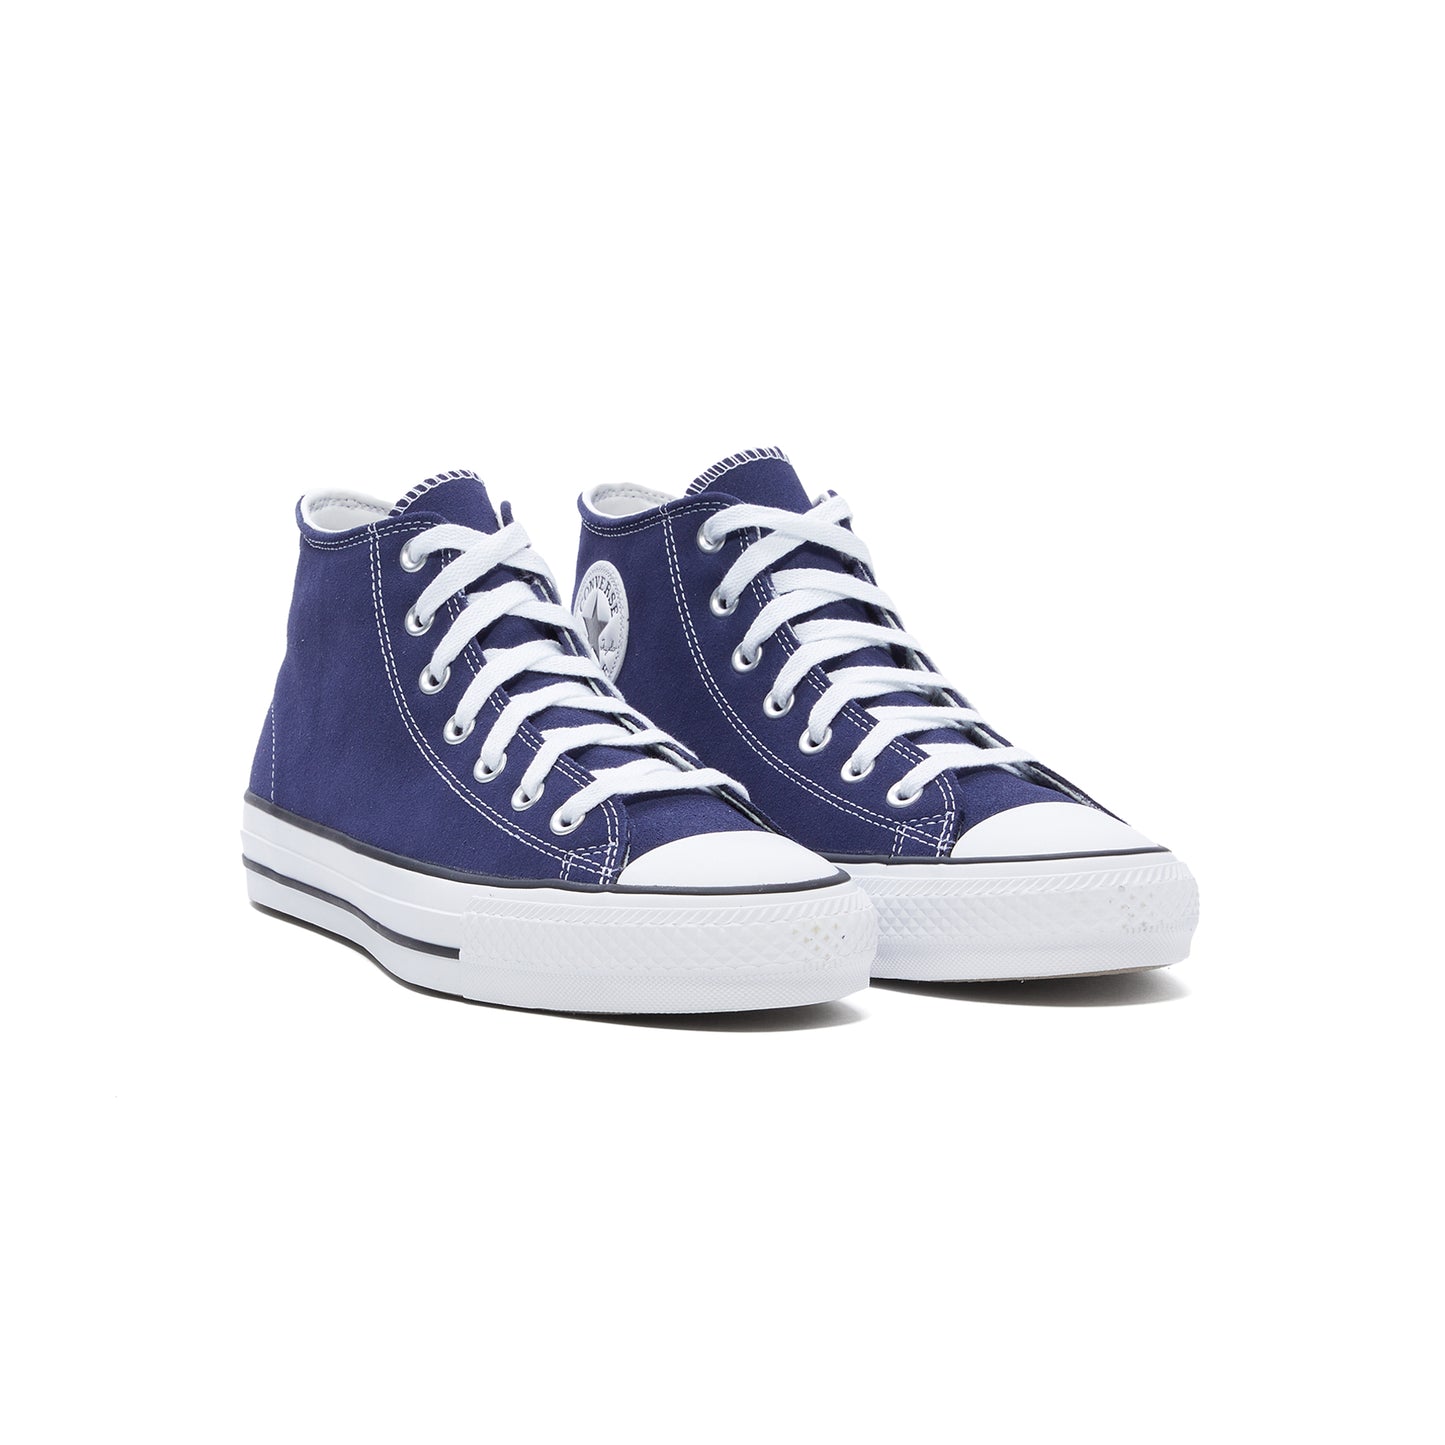 Converse CTAS Pro Mid (Uncharted Waters/White/Black)